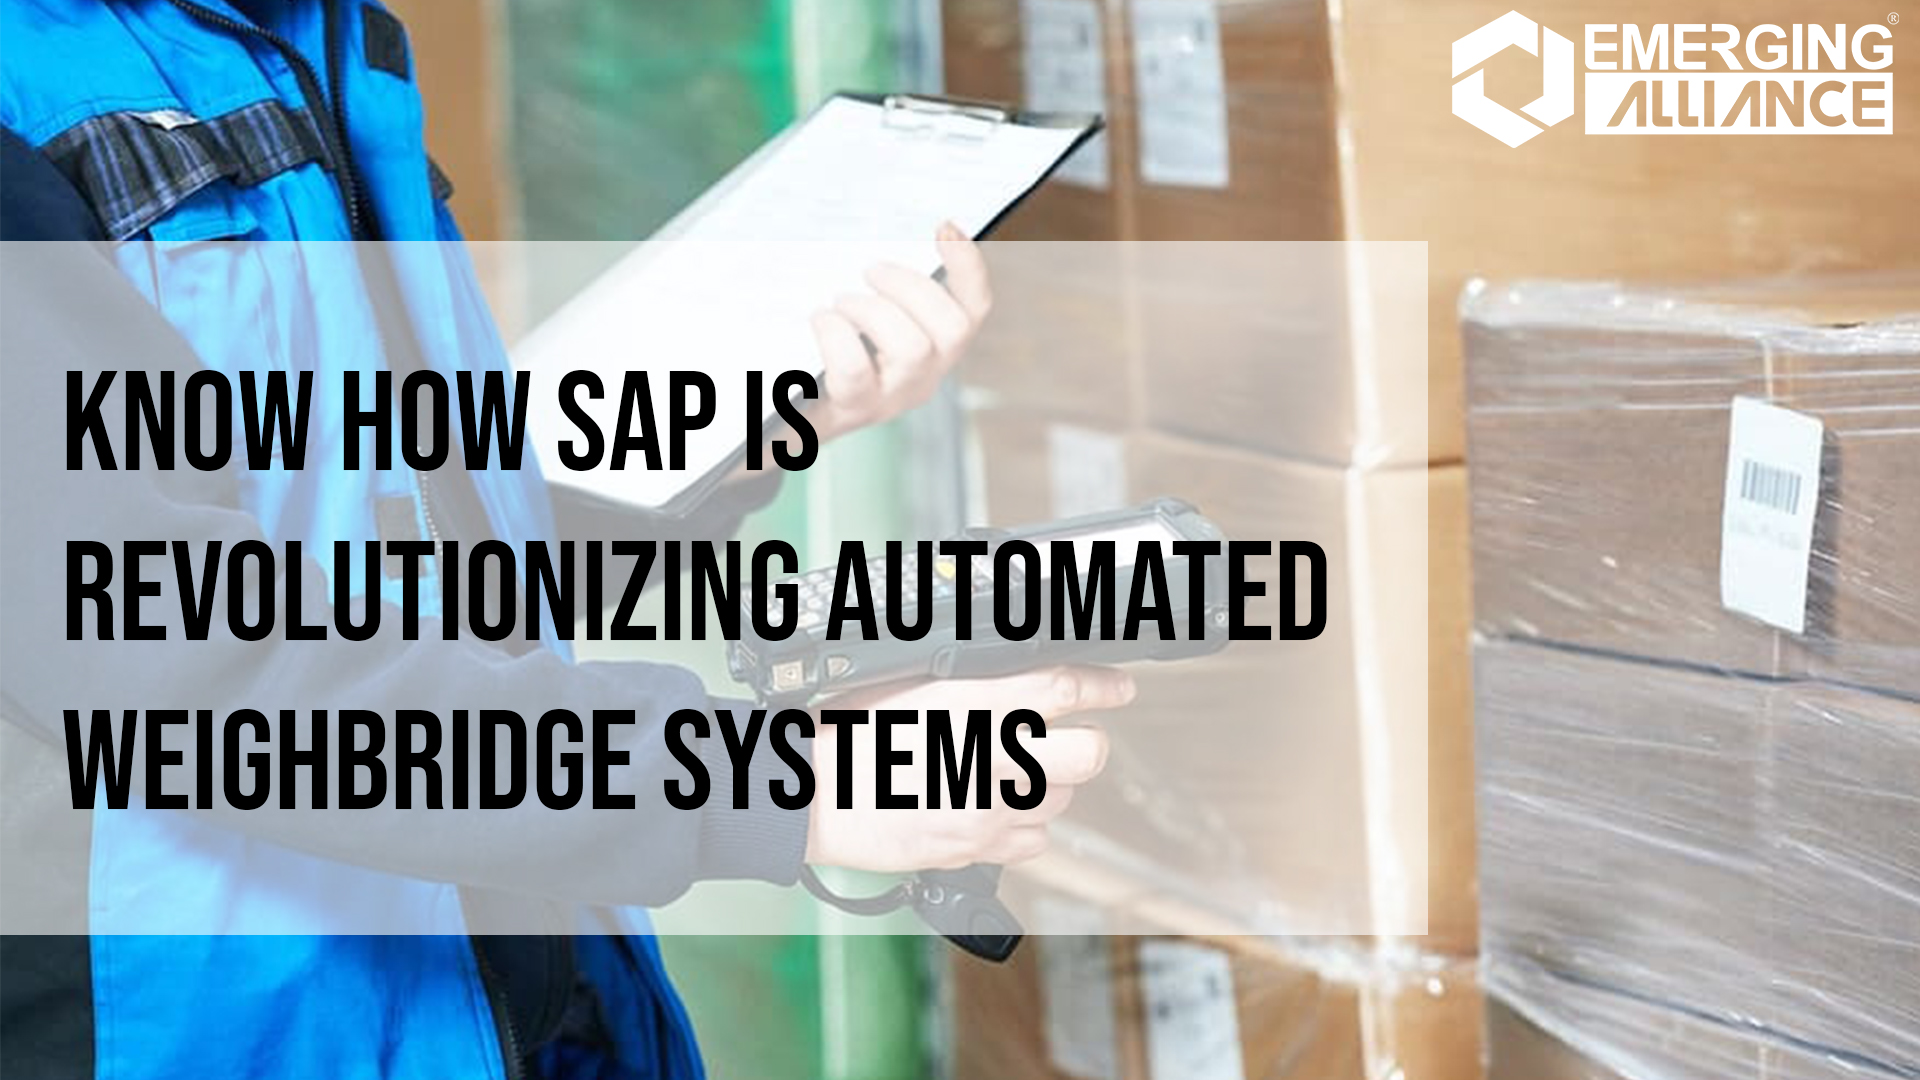 SAP for Automated Weighbridge Systems